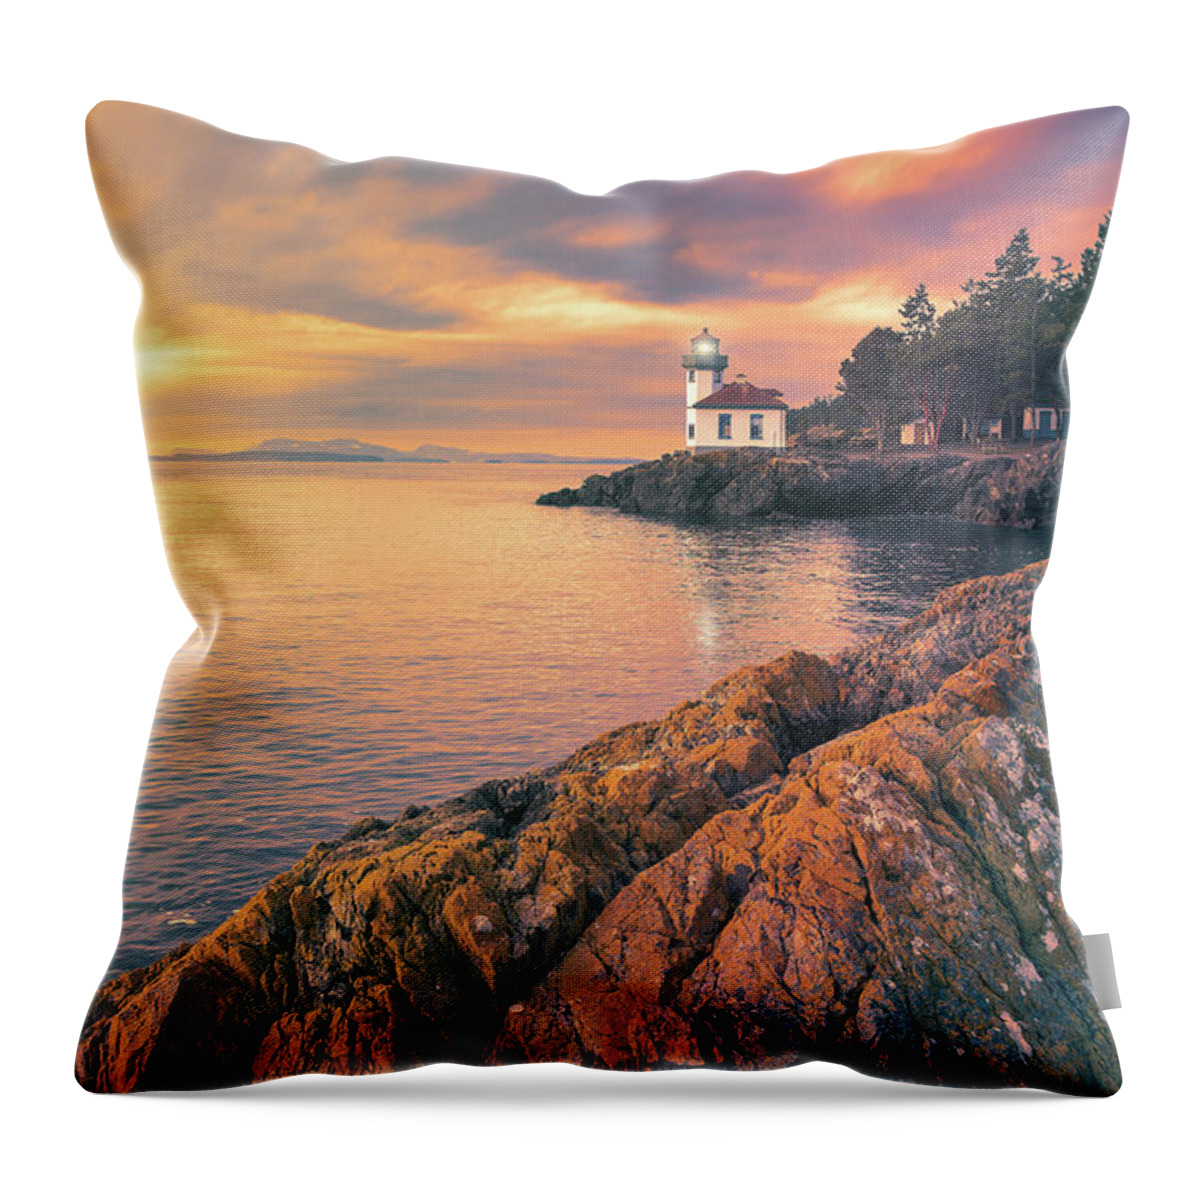 Lime Kiln Lighthouse Throw Pillow featuring the digital art Lime Kiln Lighthouse by Michael Rauwolf